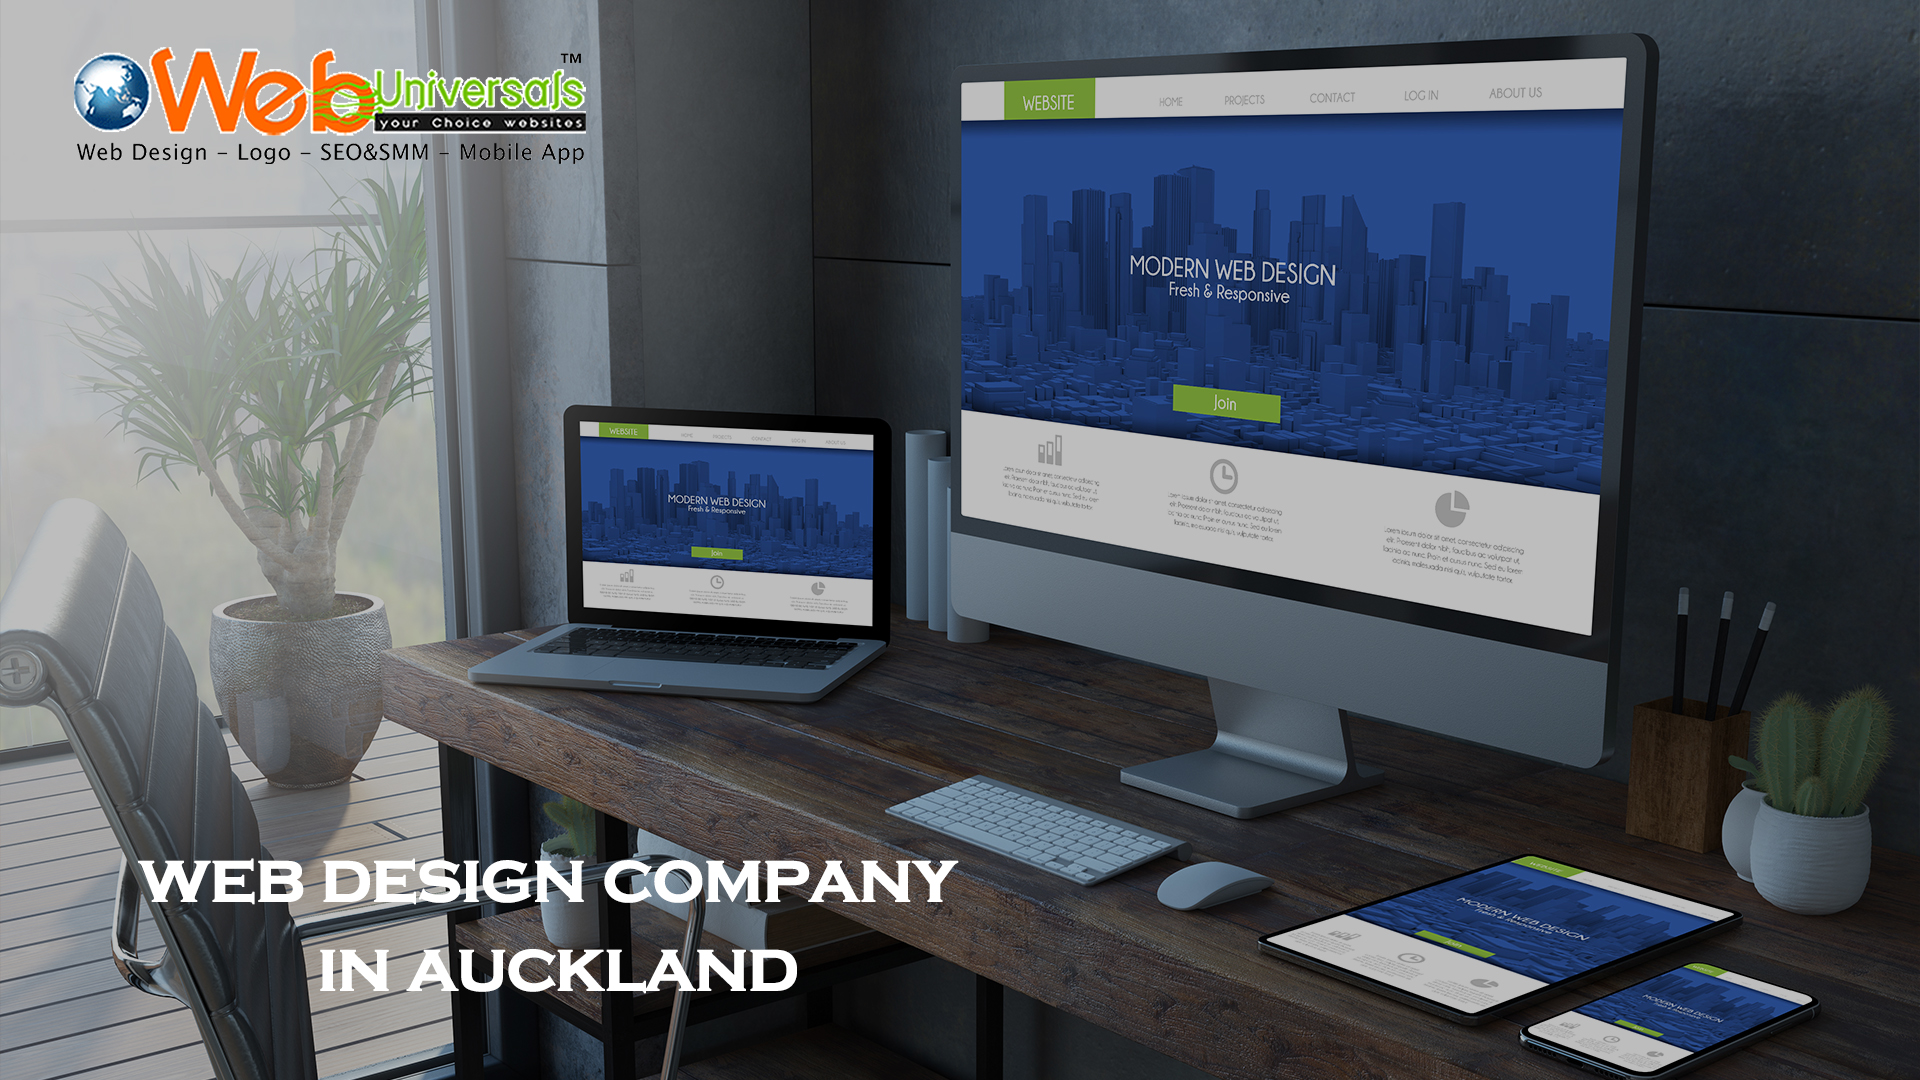 The Best Web Design Company in Auckland